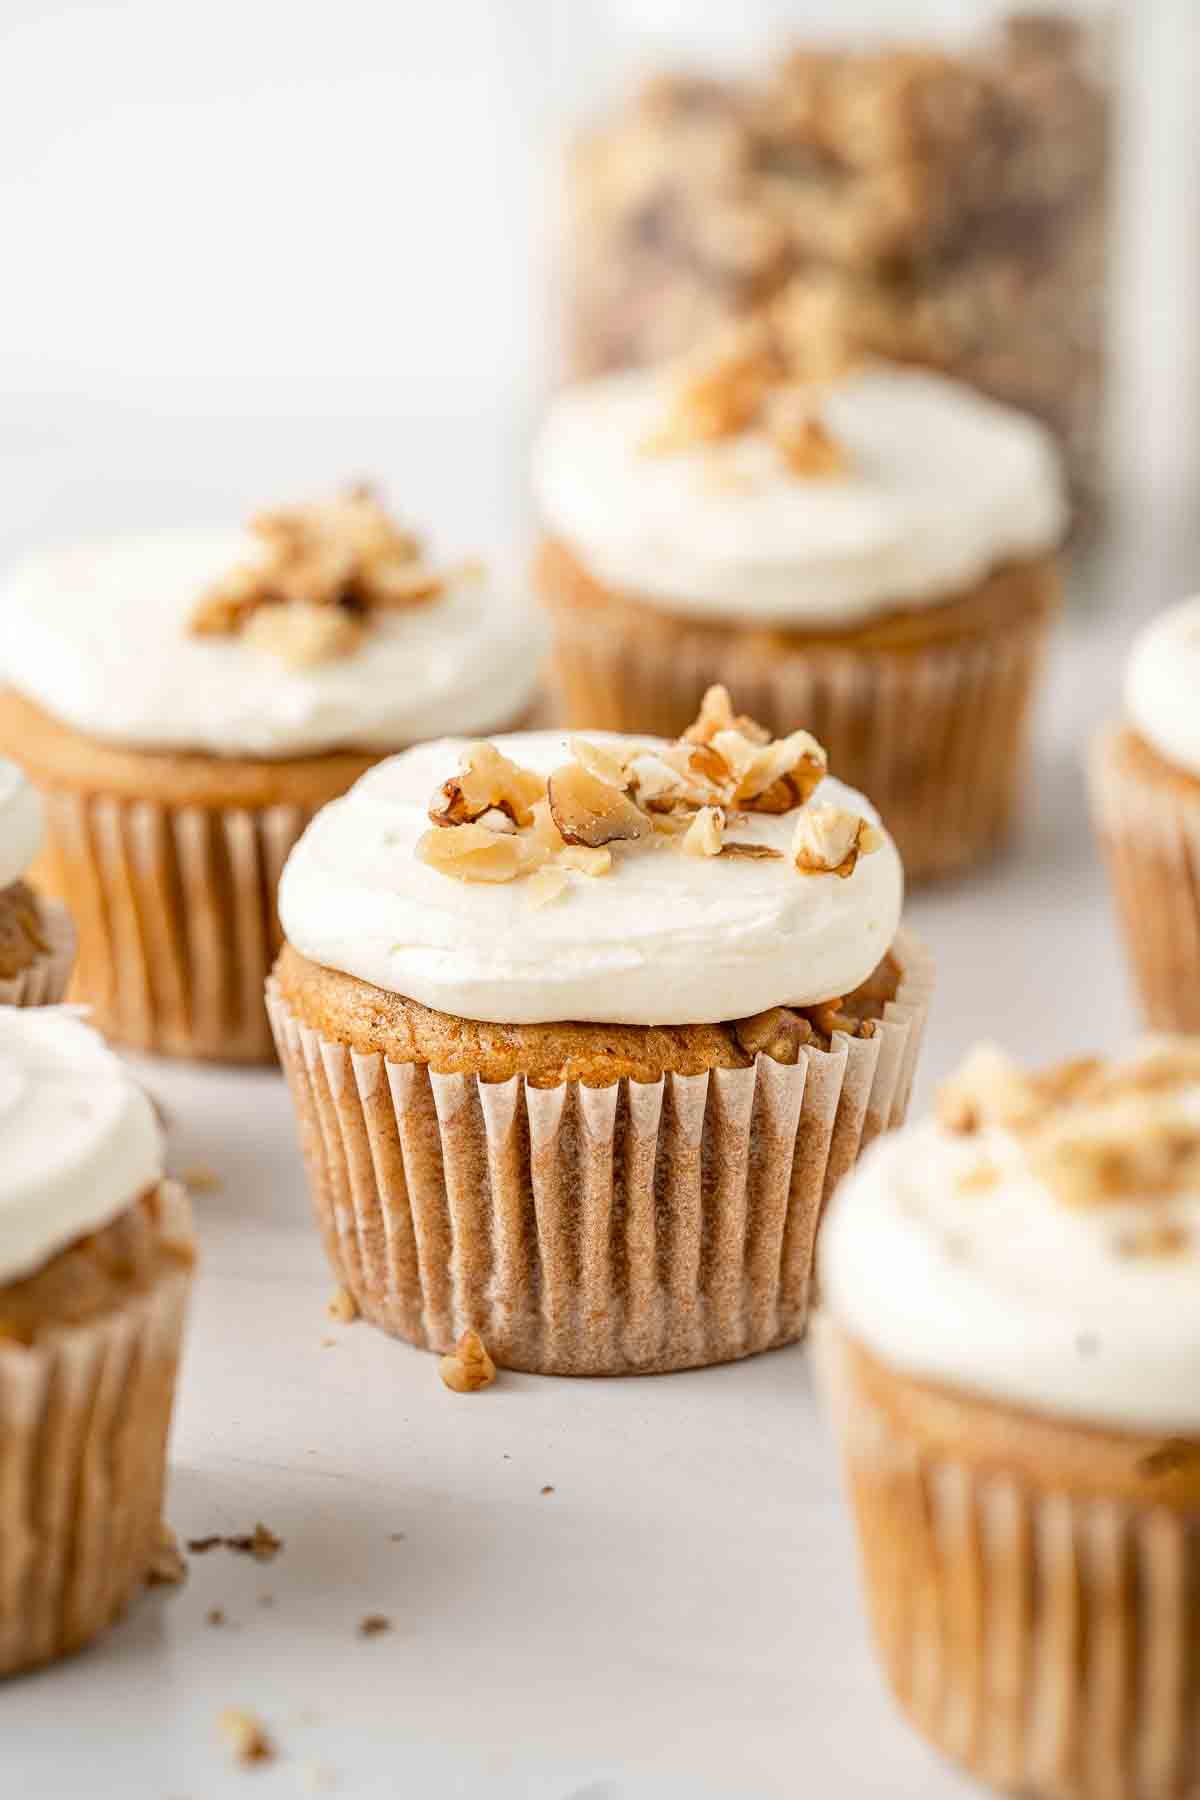 Vegan carrot cake cupcakes topped with cream cheese frosting and crushed walnuts.